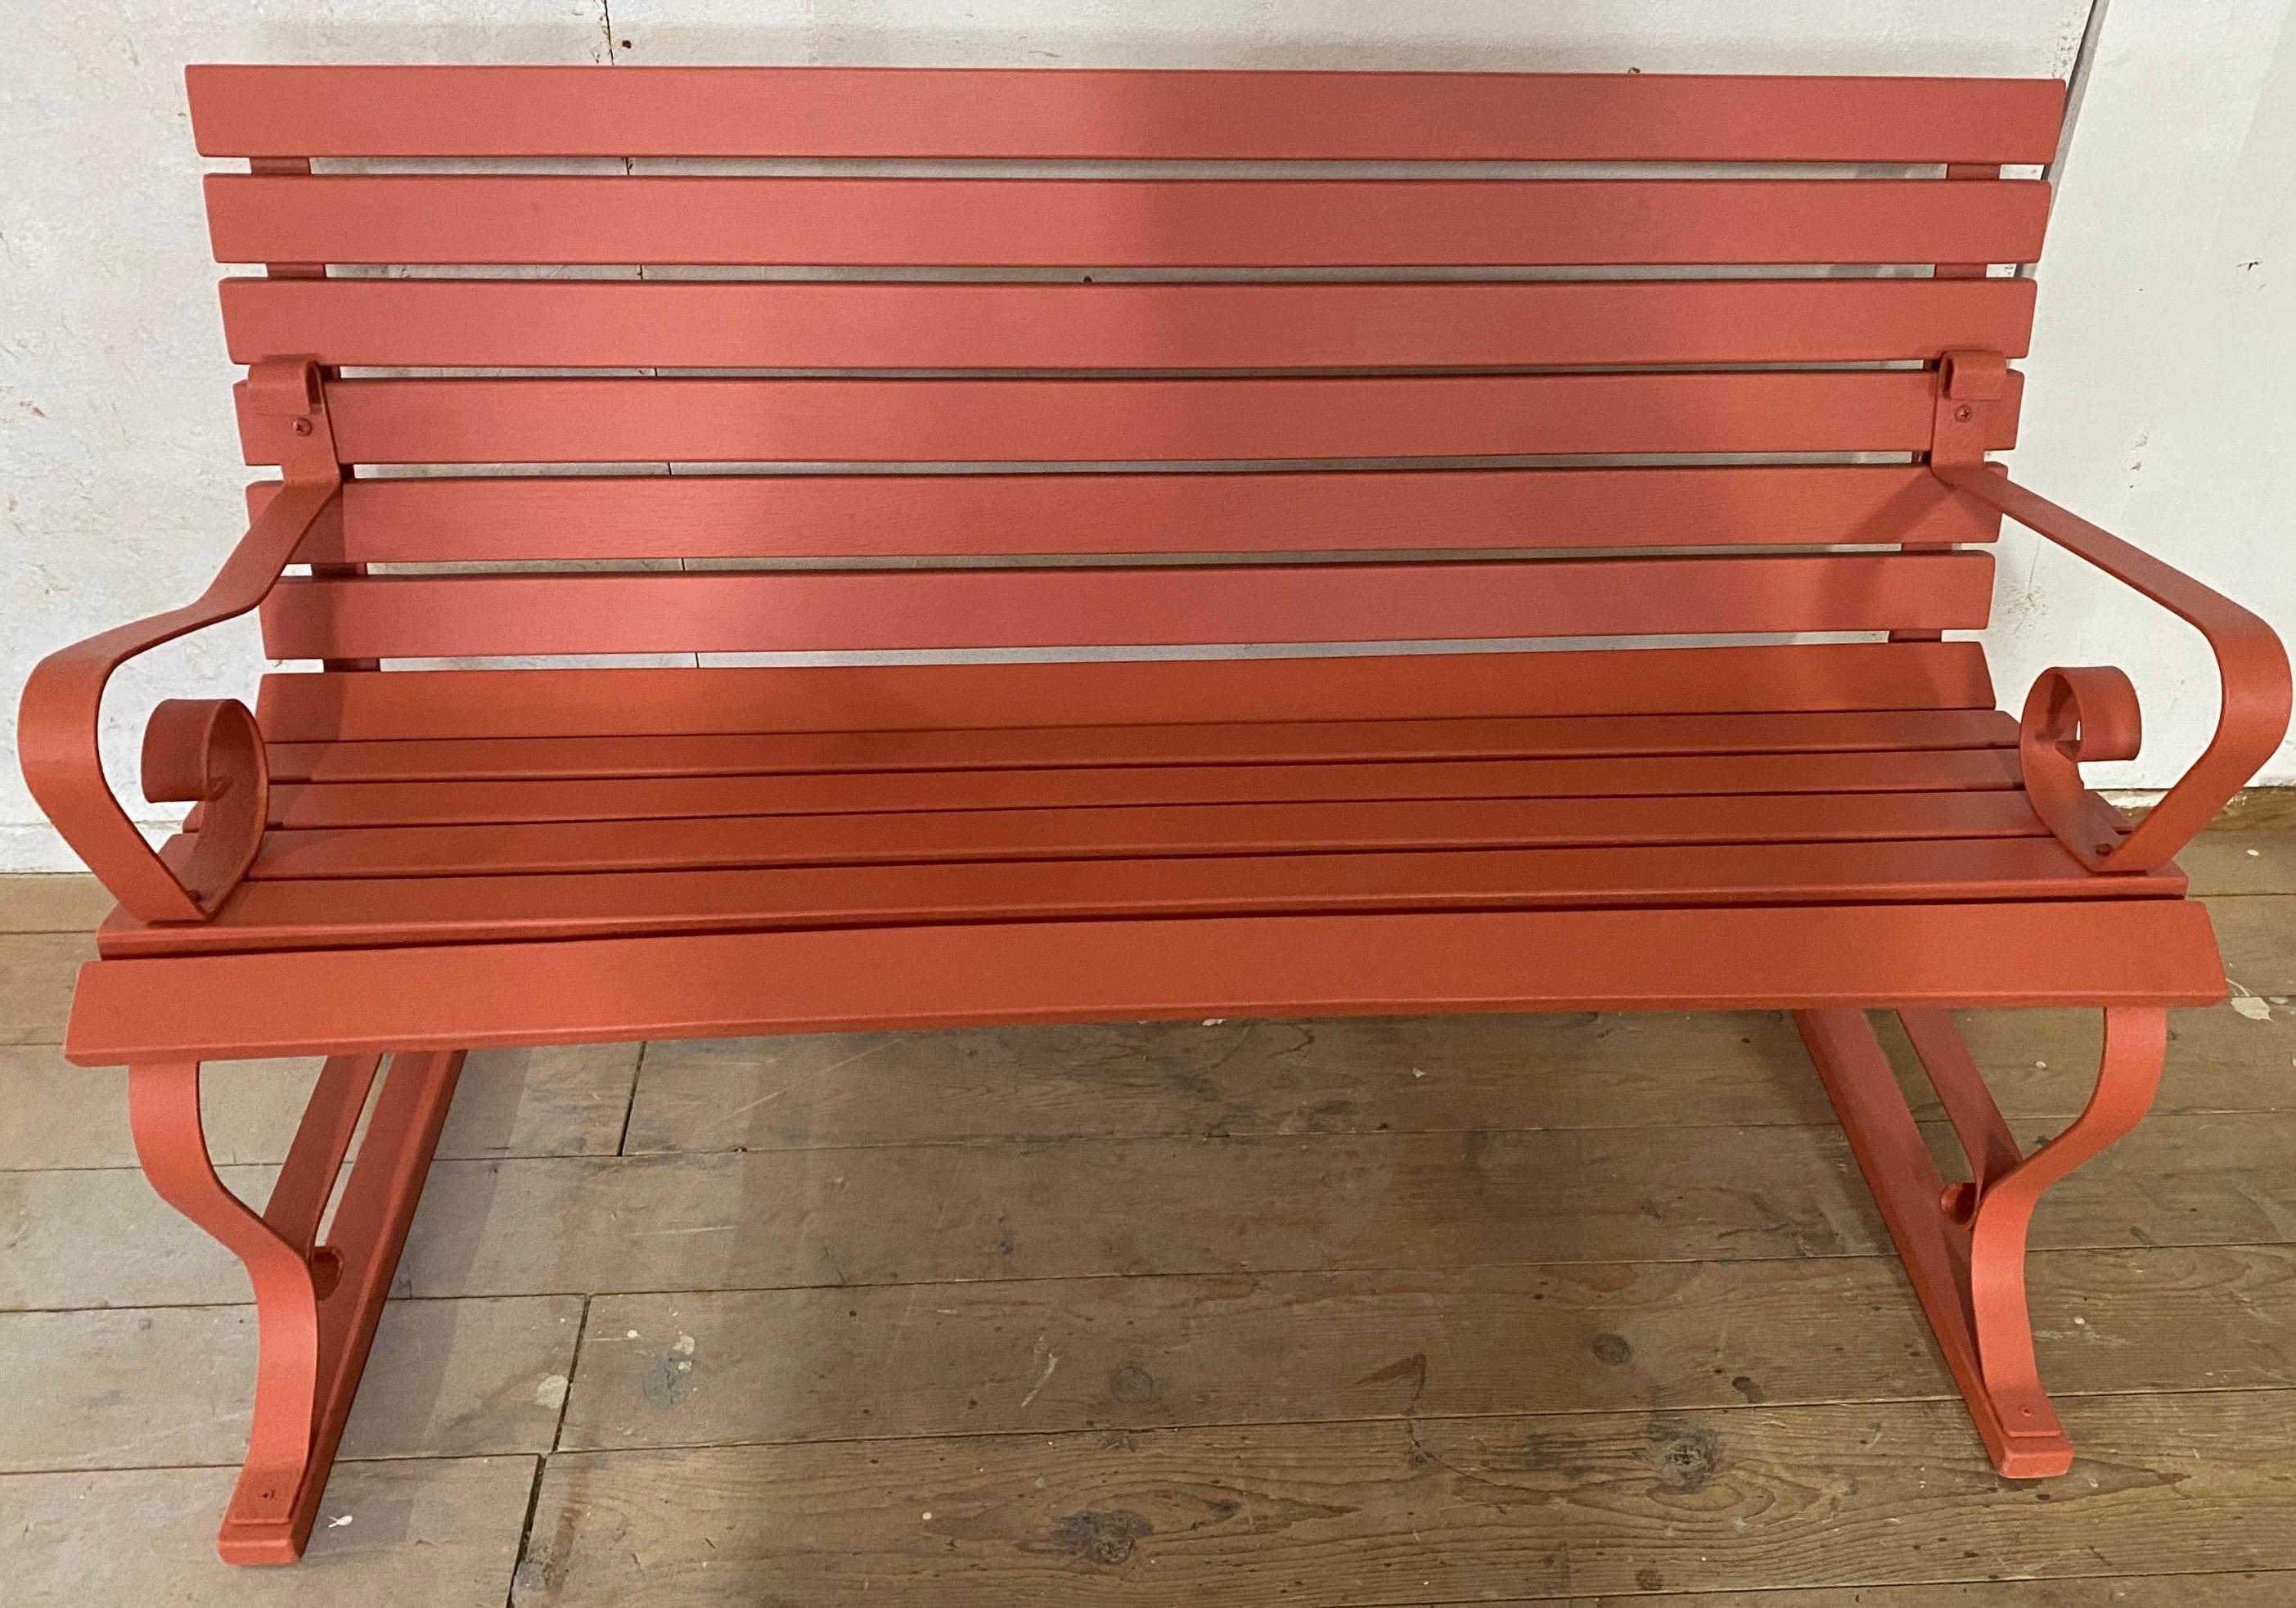 A simple, classic late 19th century, slat design wrought iron park / garden bench with wood slat seat and back. The iron metal frame has curved arms and legs. The two arm supports are NOT identical. Newly painted. Ask us about painting it in a